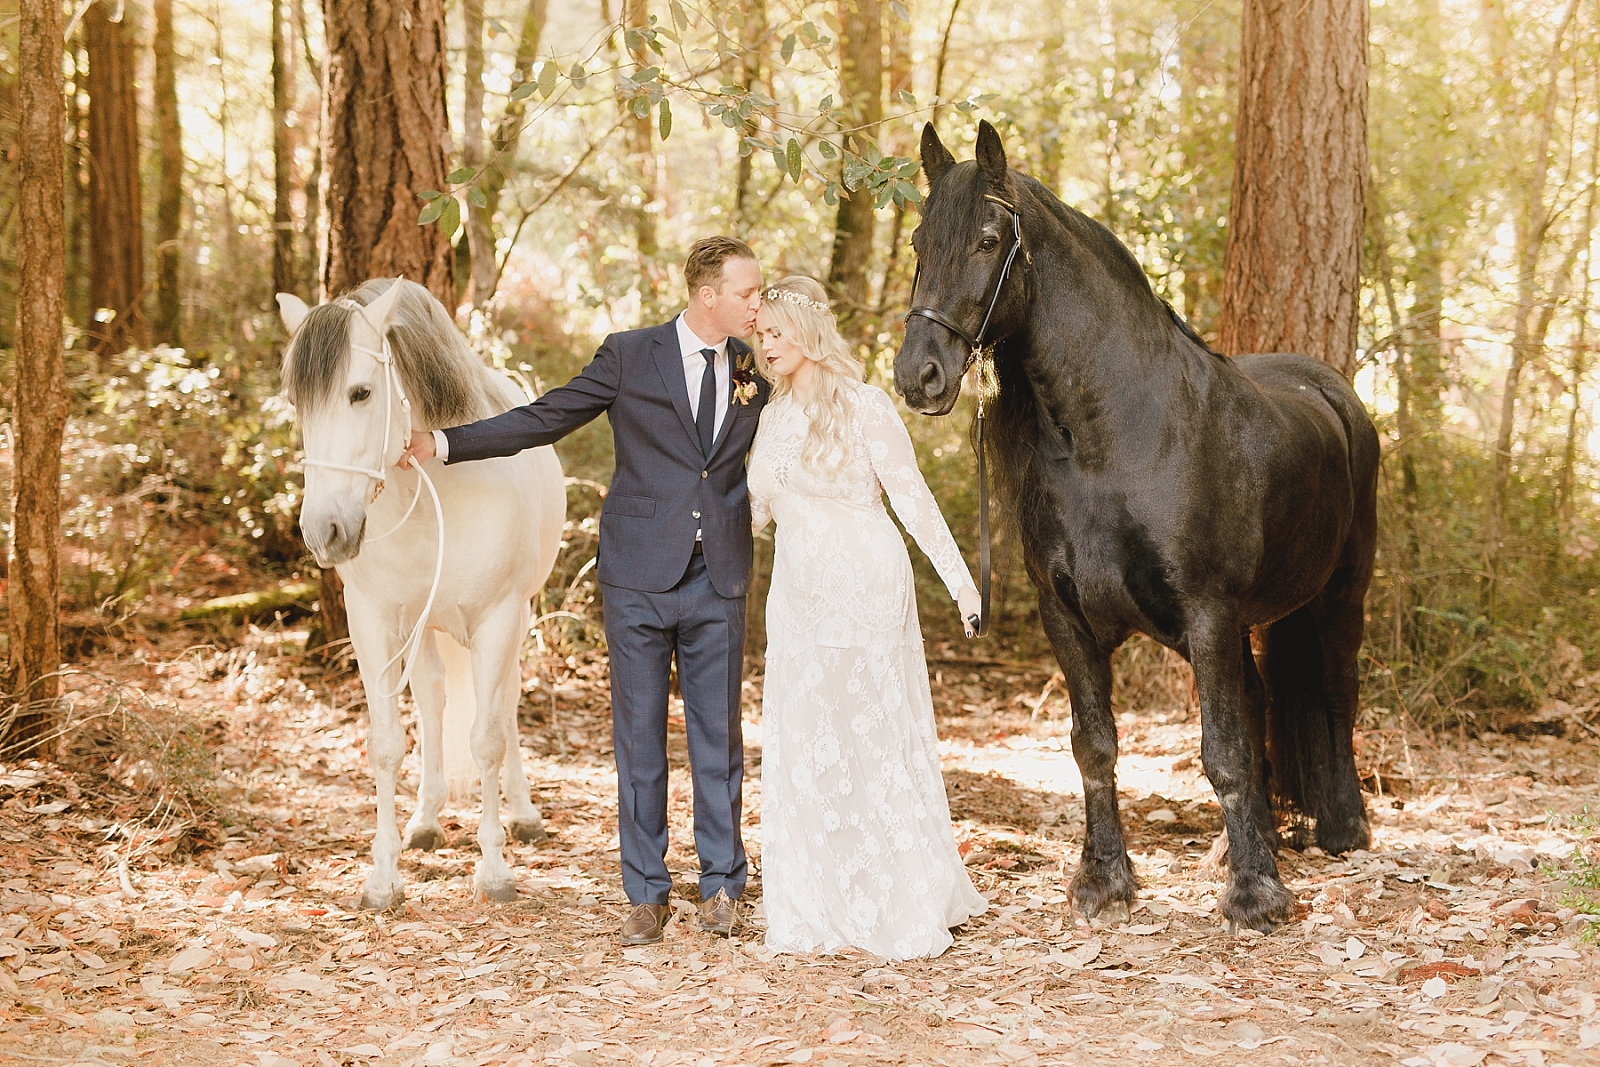 Groom kissing brides forehead standing next to horses in the forest